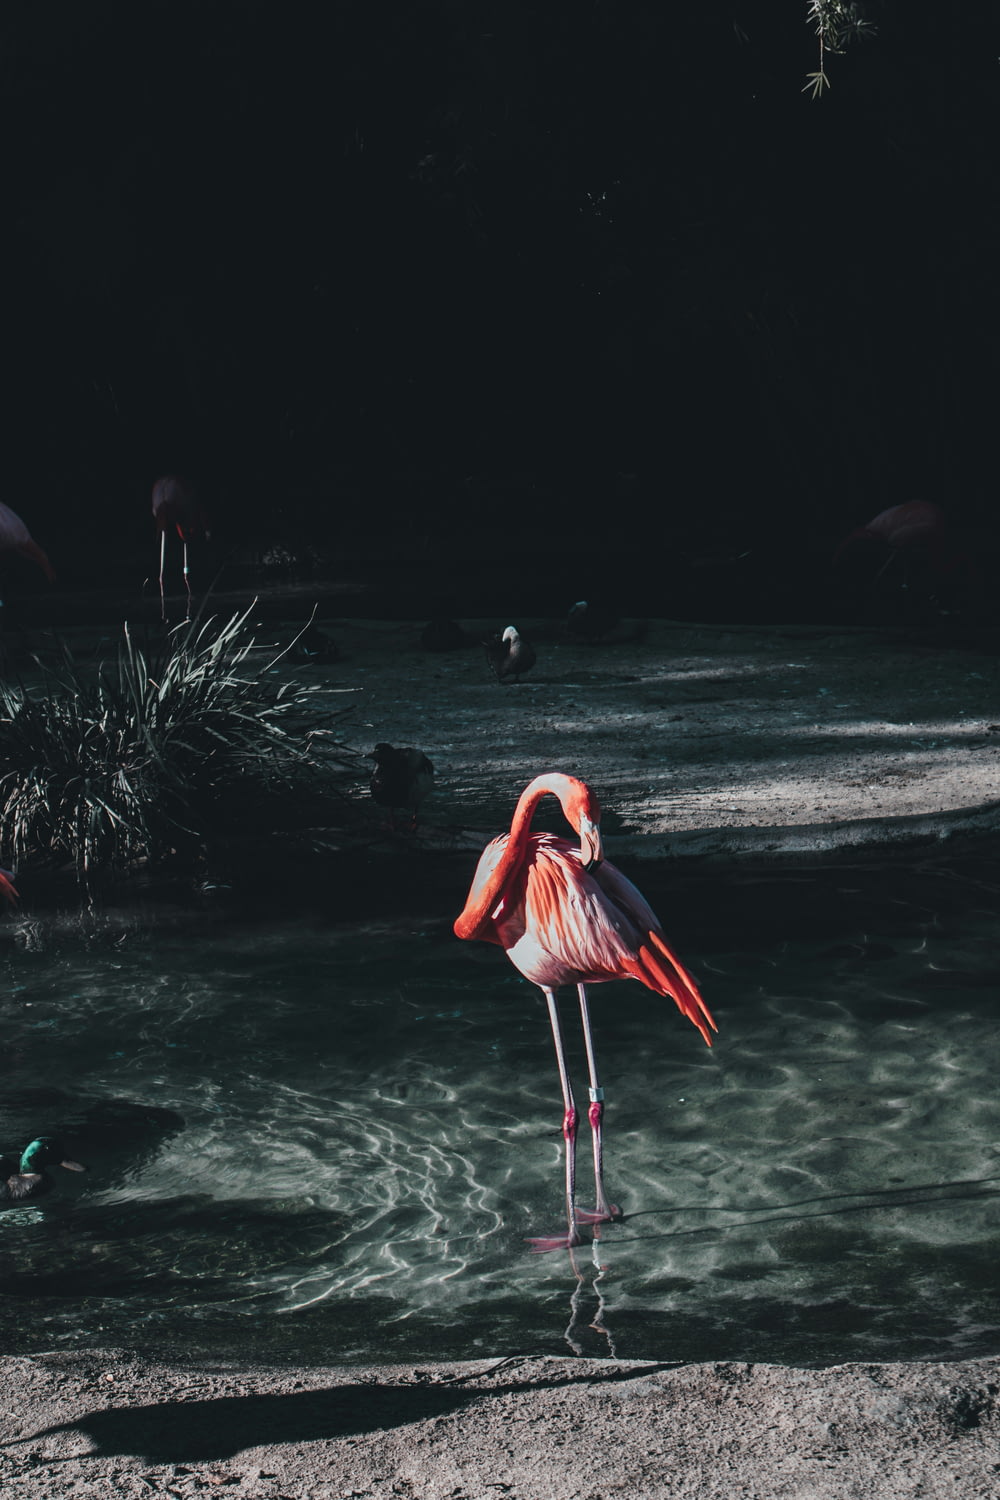 a flamingo standing in the water at the edge of a body of water